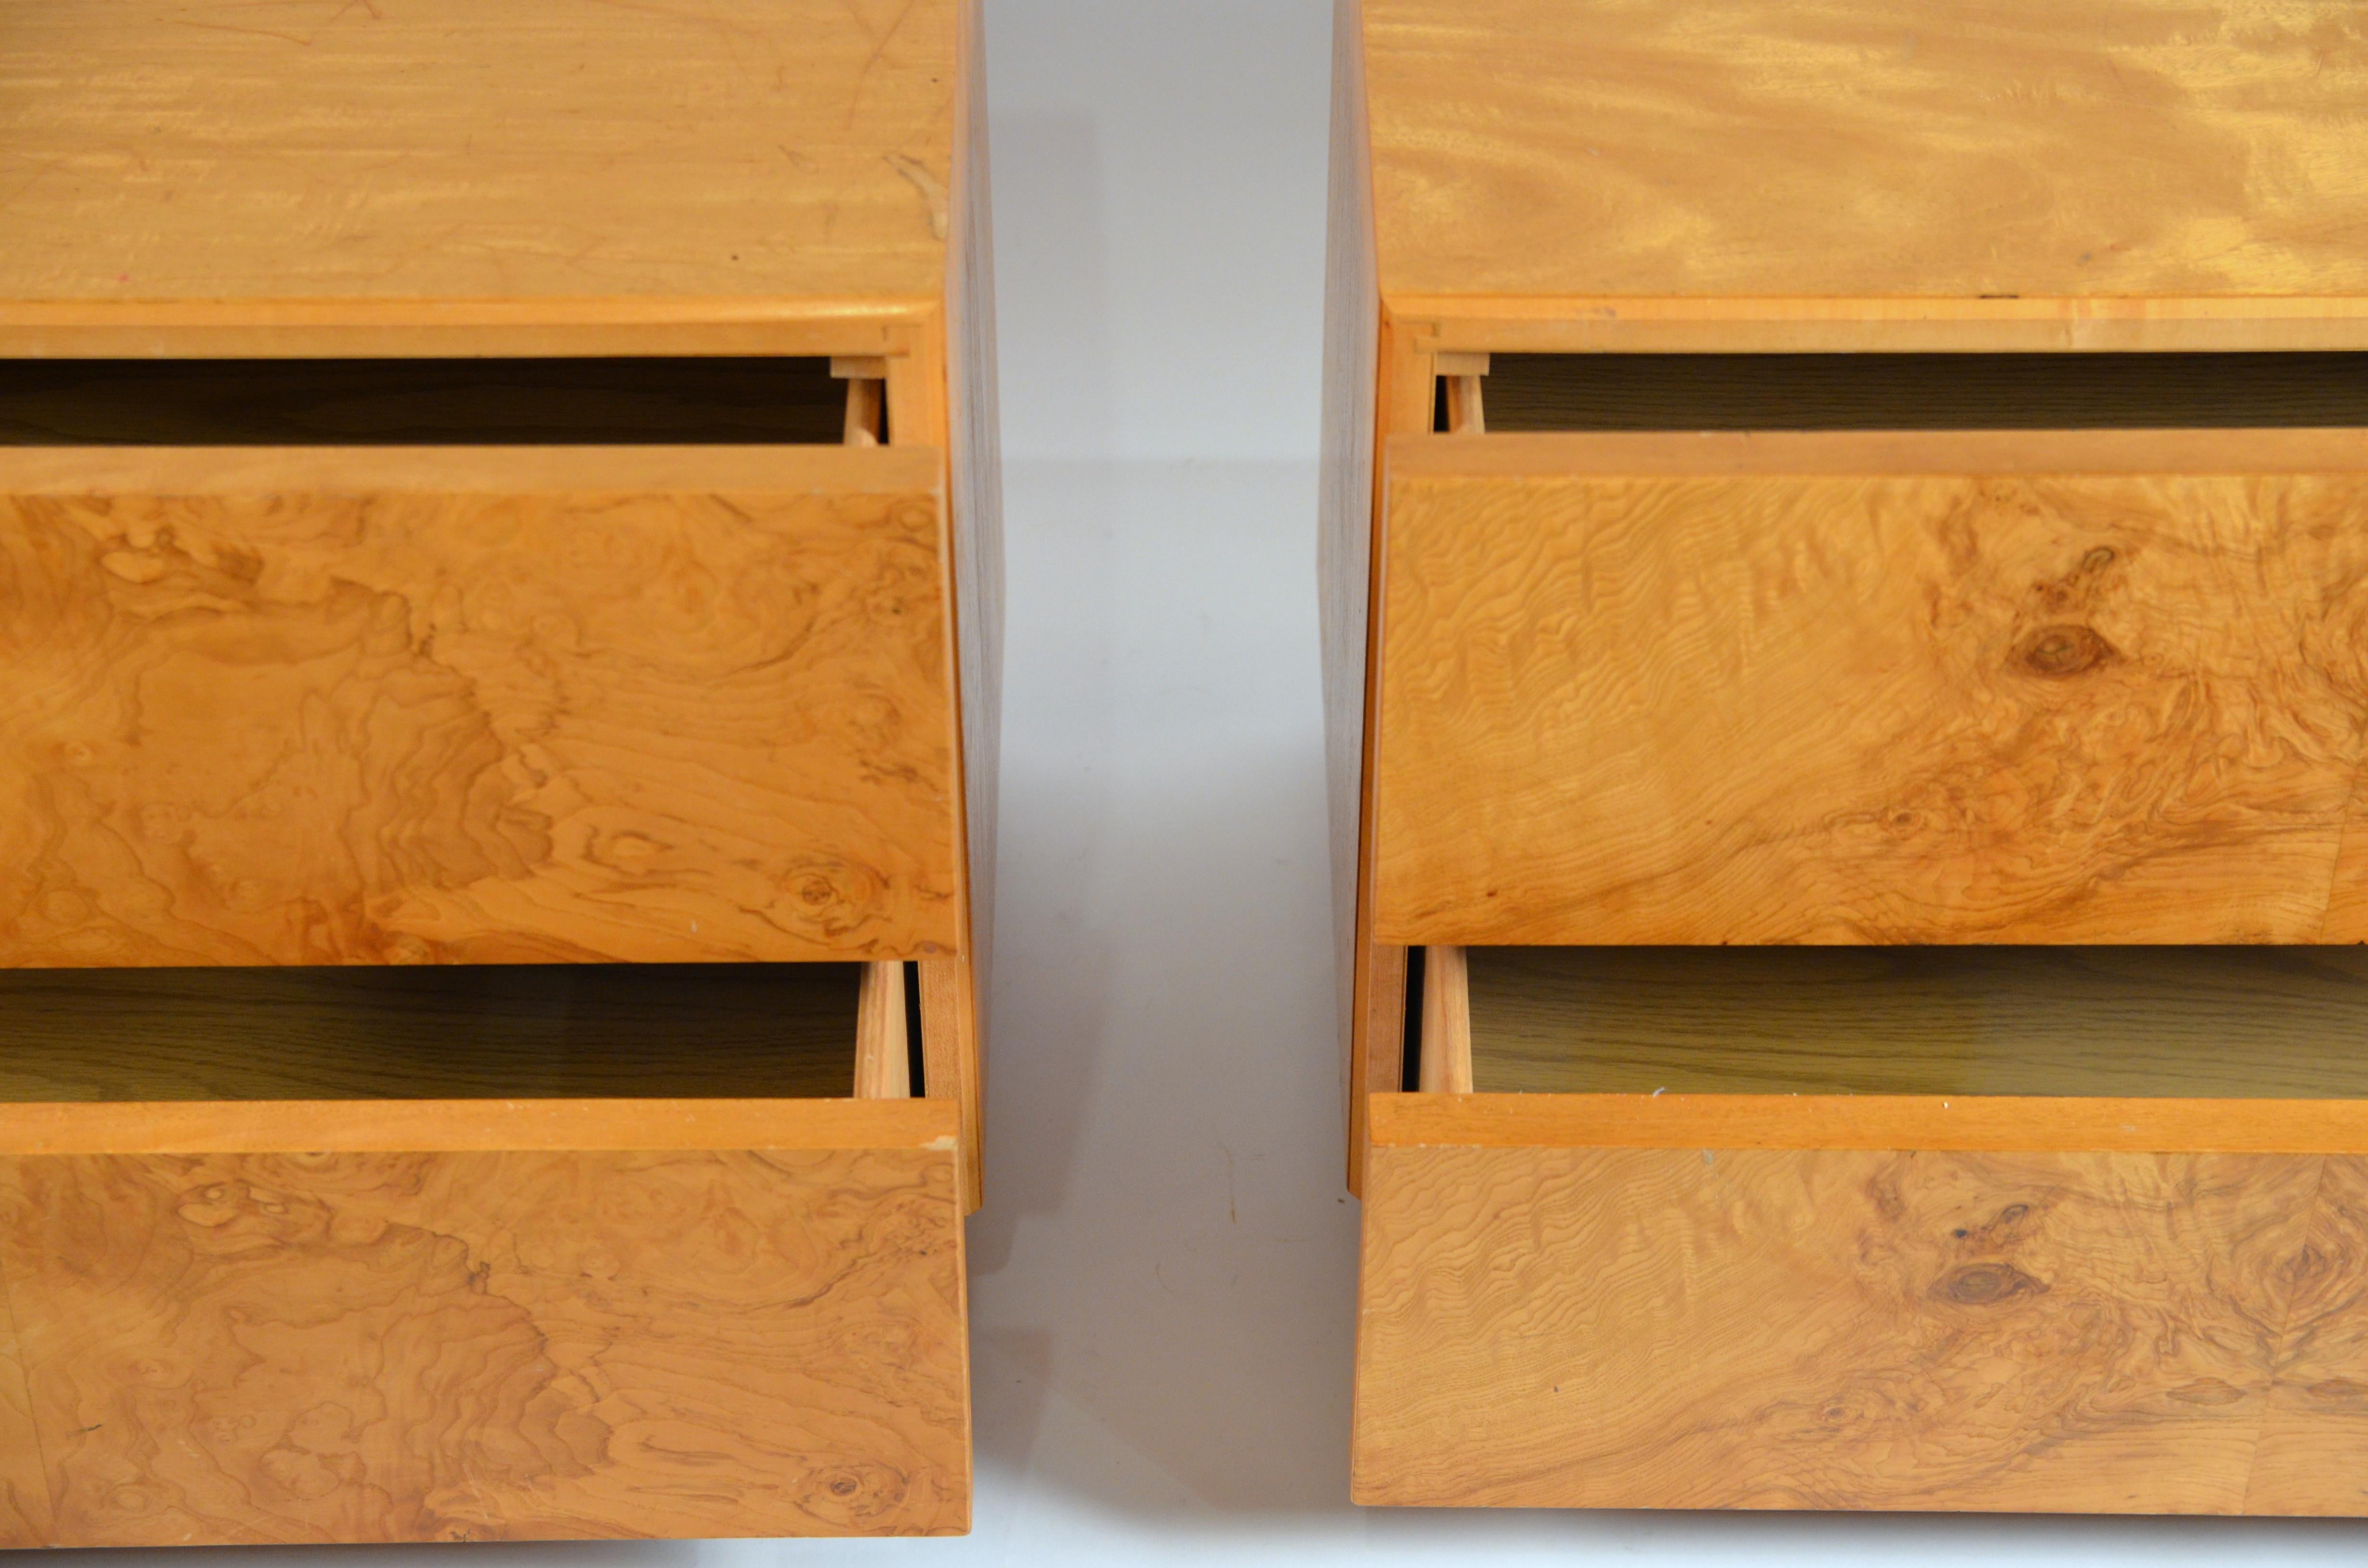 American Pair of Minimalist 'Amboine' Burl Wood Nightstands by Design Frères For Sale